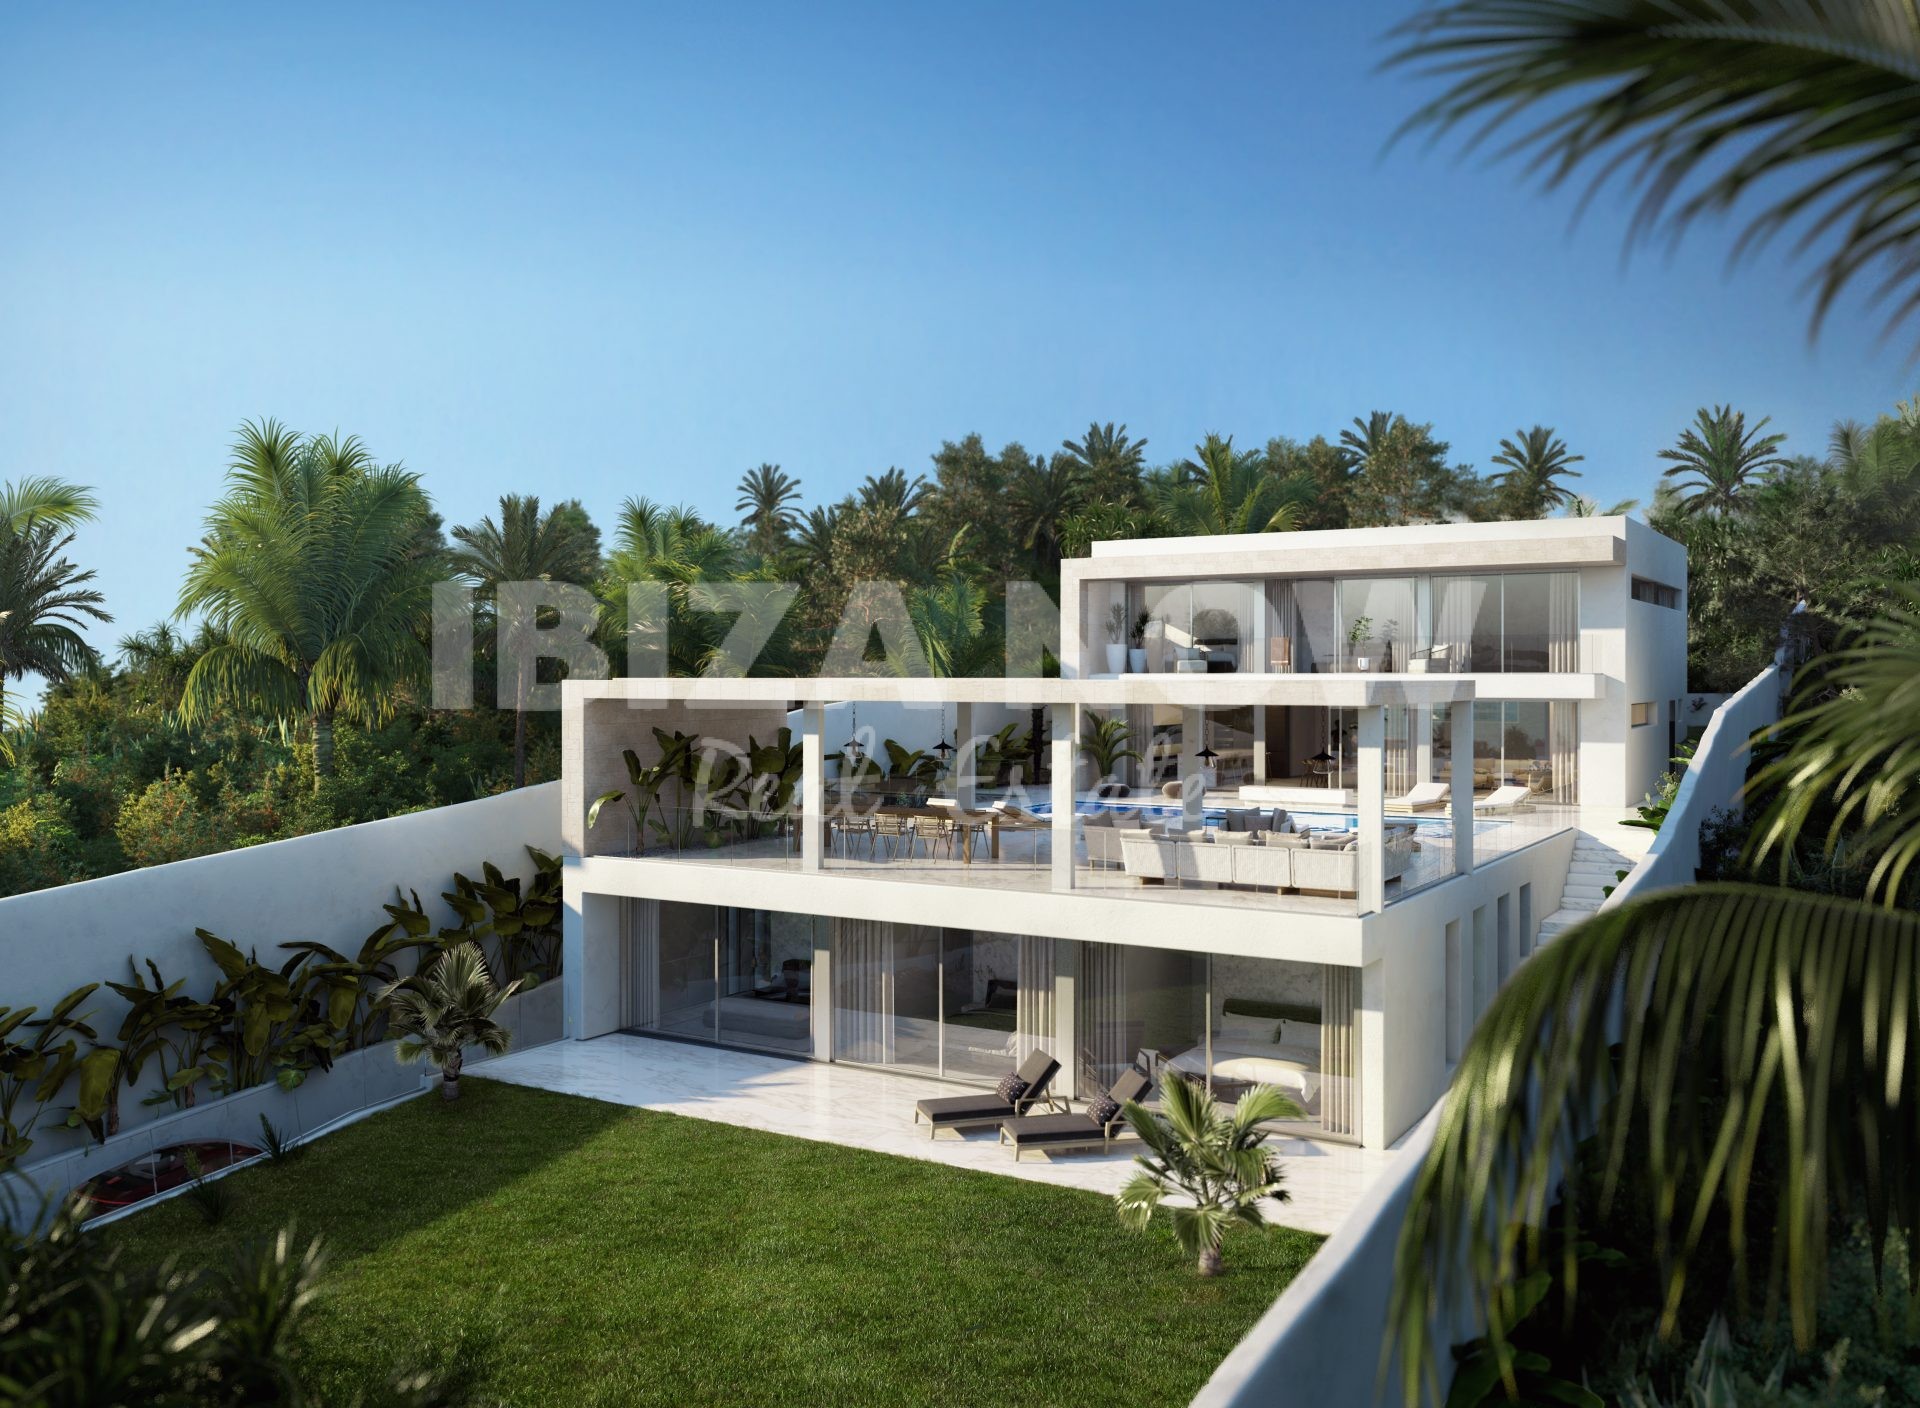 Sea view plots for sale with the project to build 2 villas in Talamanca, Ibiza.